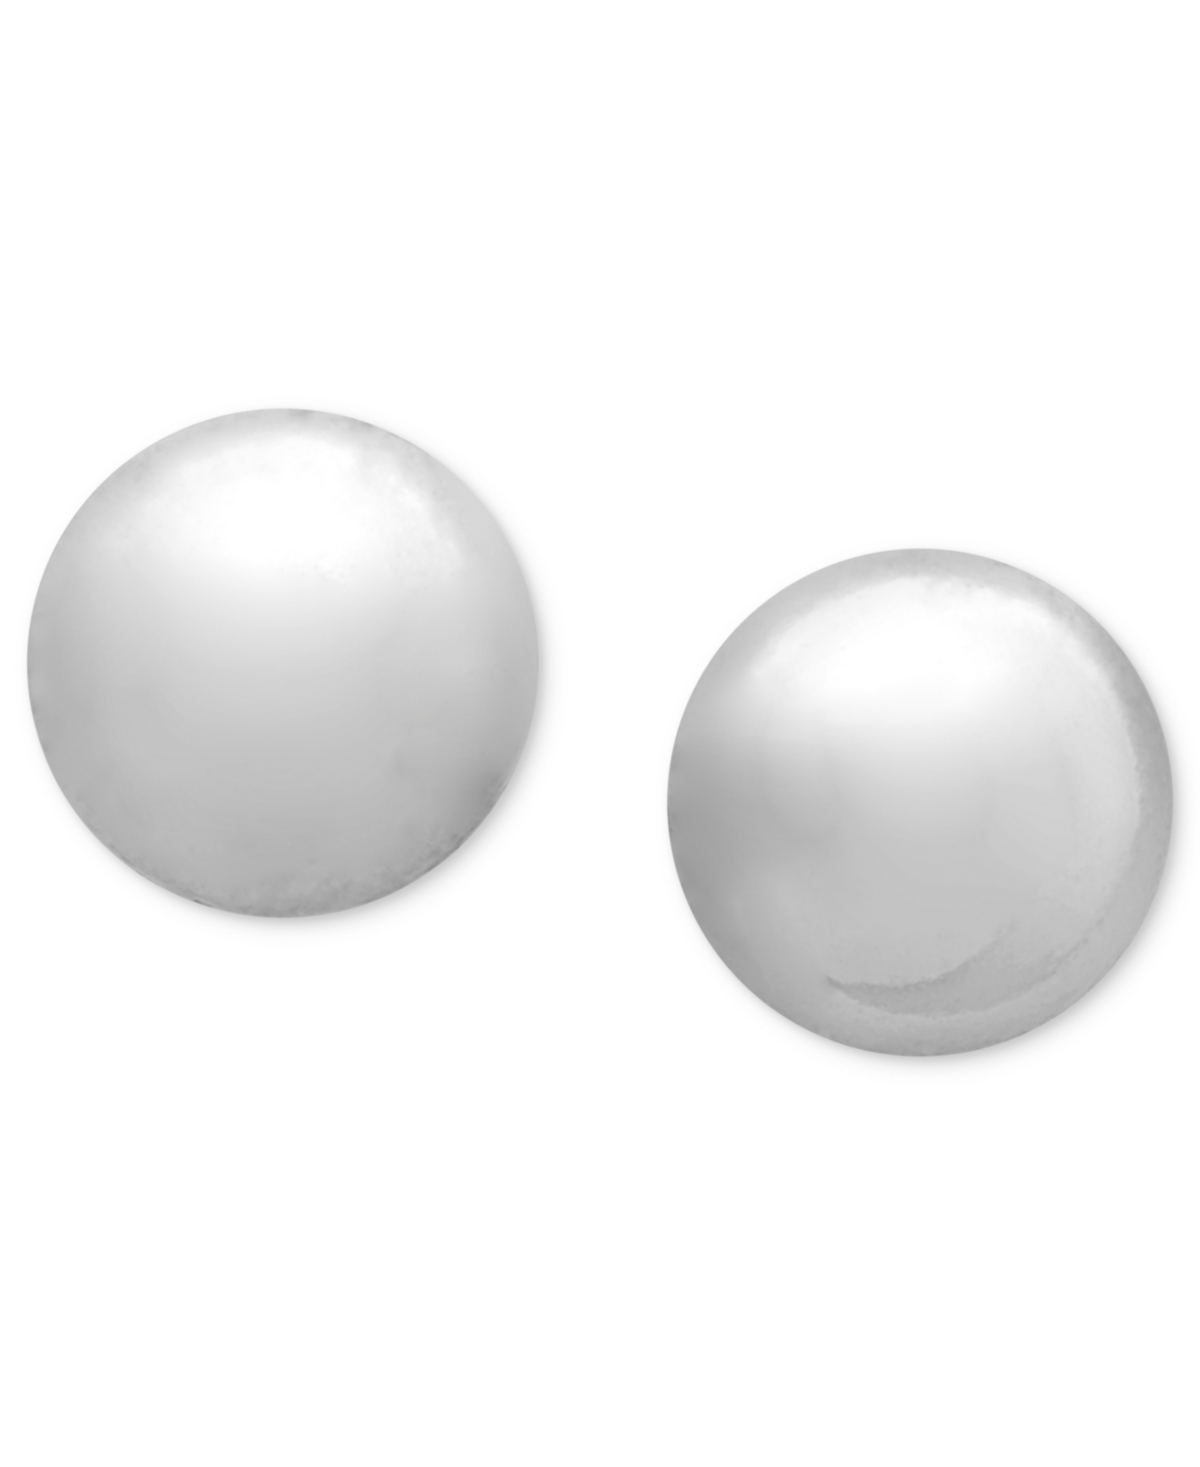 Giani Bernini Ball Stud Earrings (8mm) in 18k Gold over Sterling Silver, Created for Macy's